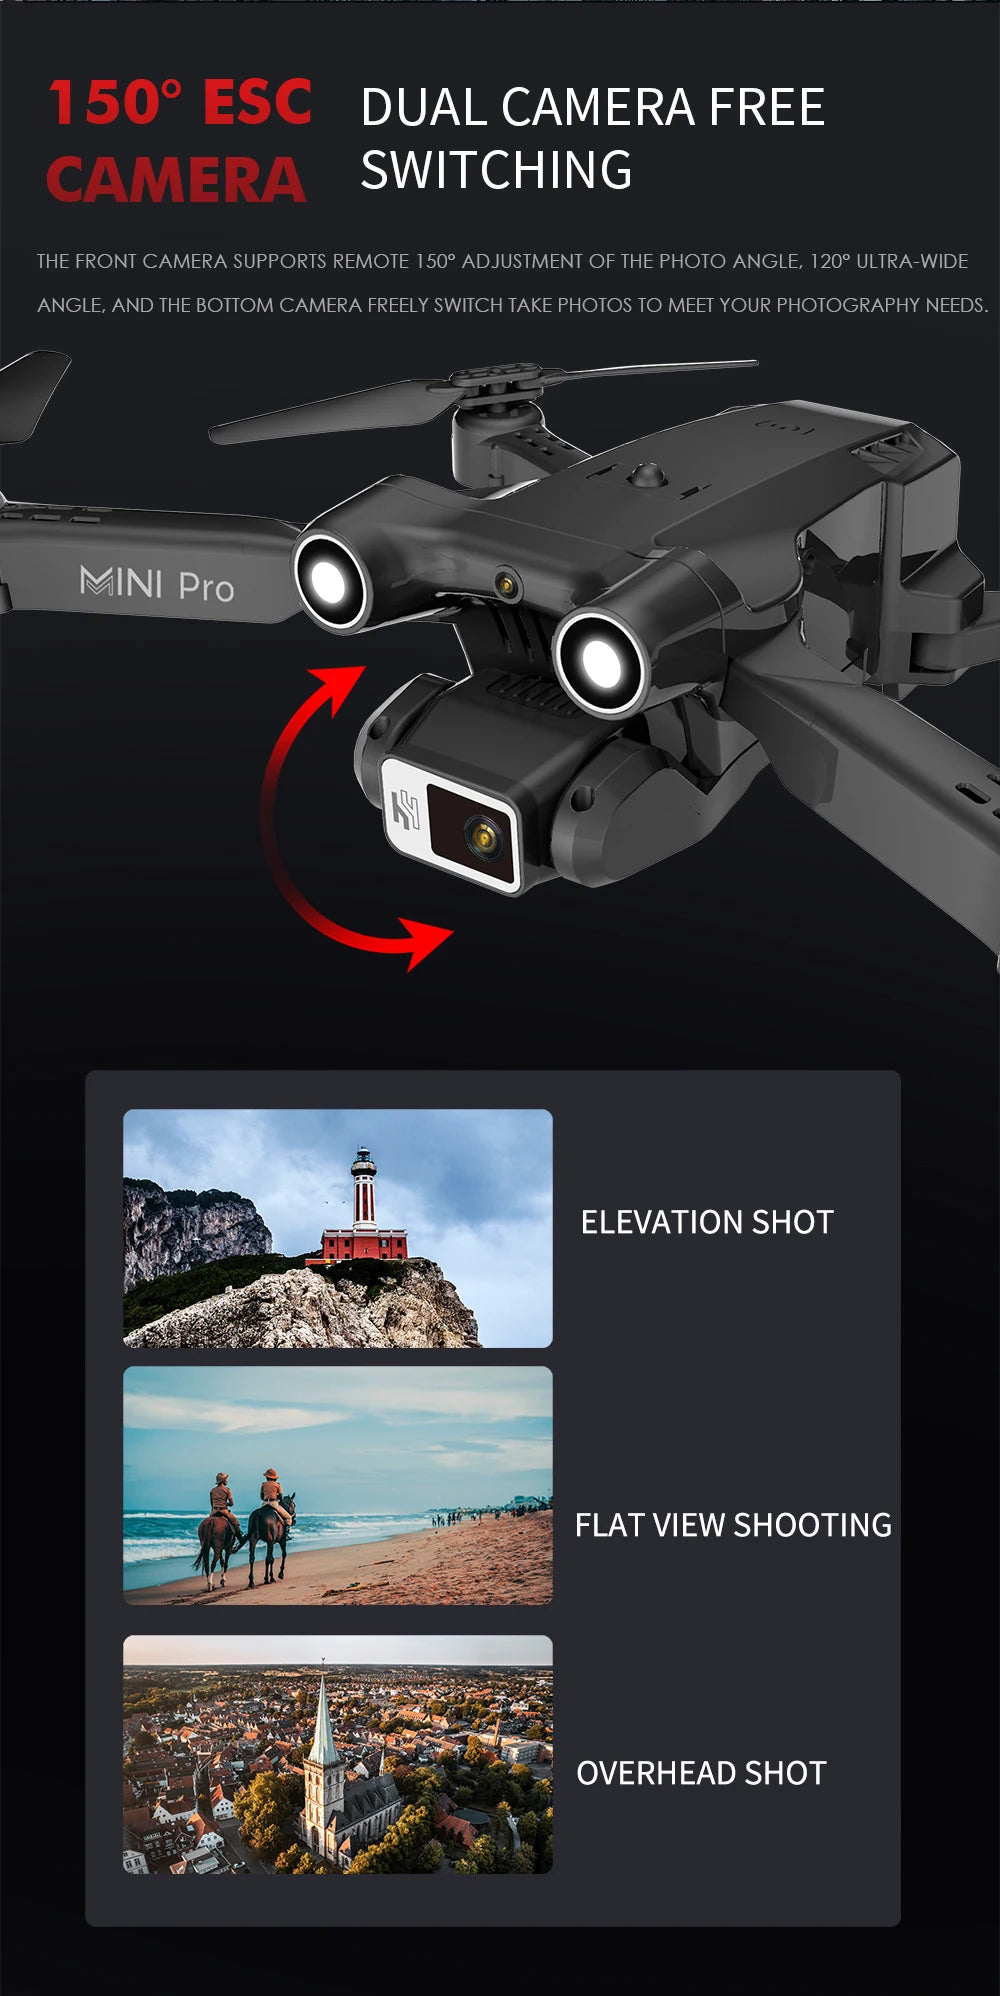 E63 Drone, 1500 esc dual camera free camera switching the front camera supports remote 1500